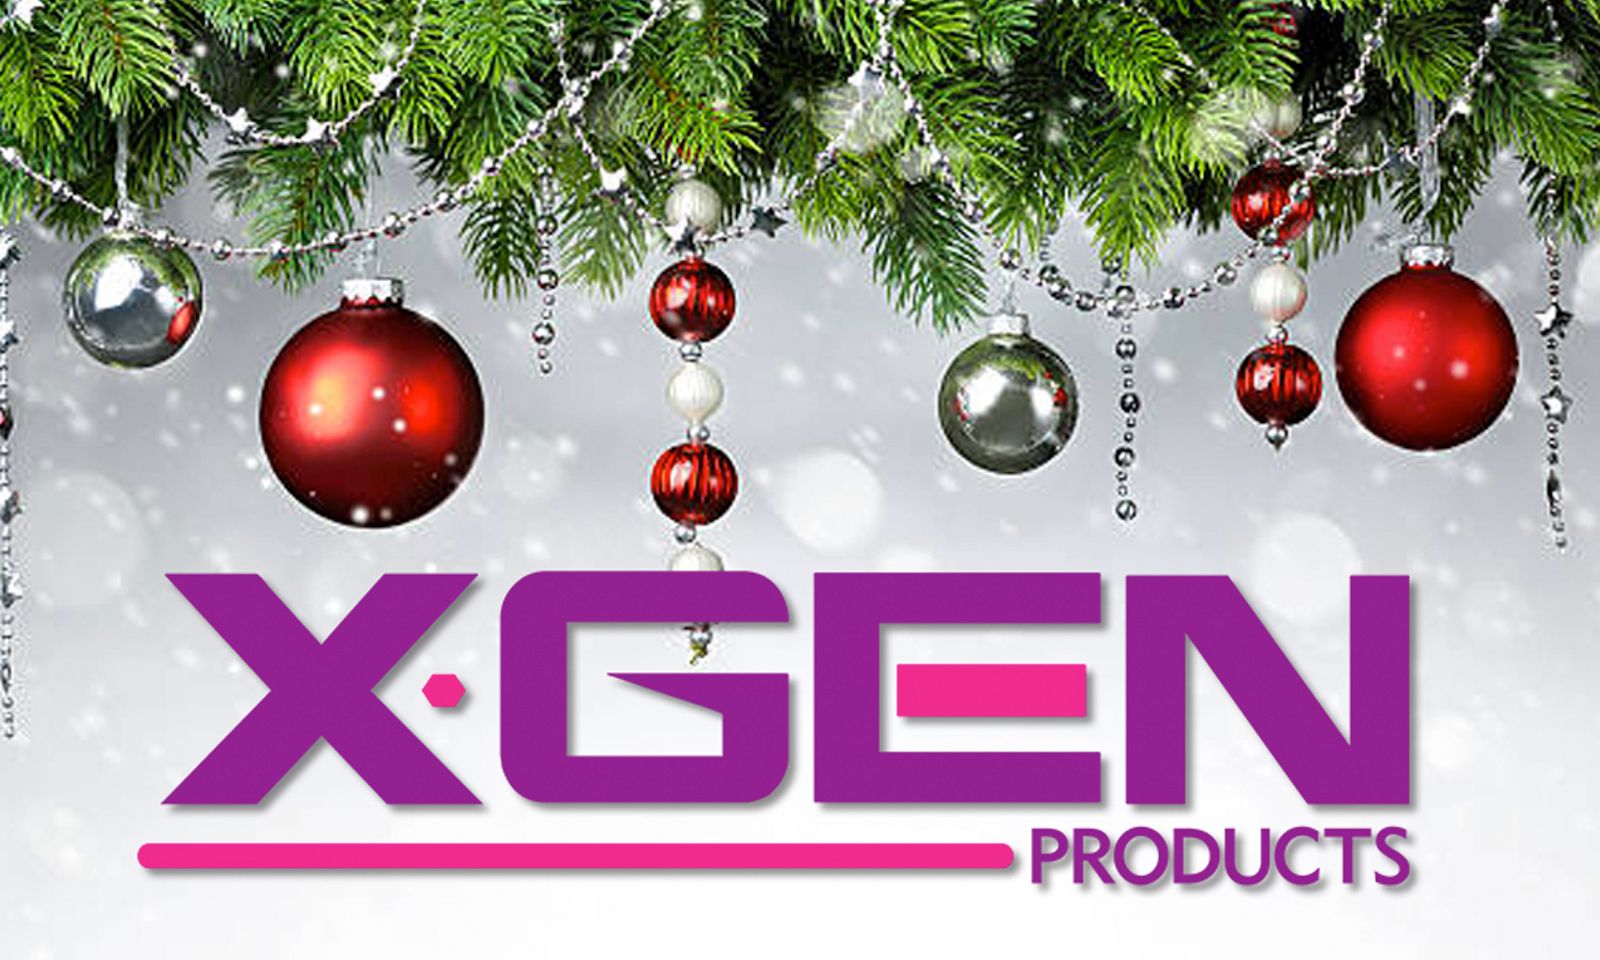 Xgen Is One-Stop Shop for Everything This Holiday Season